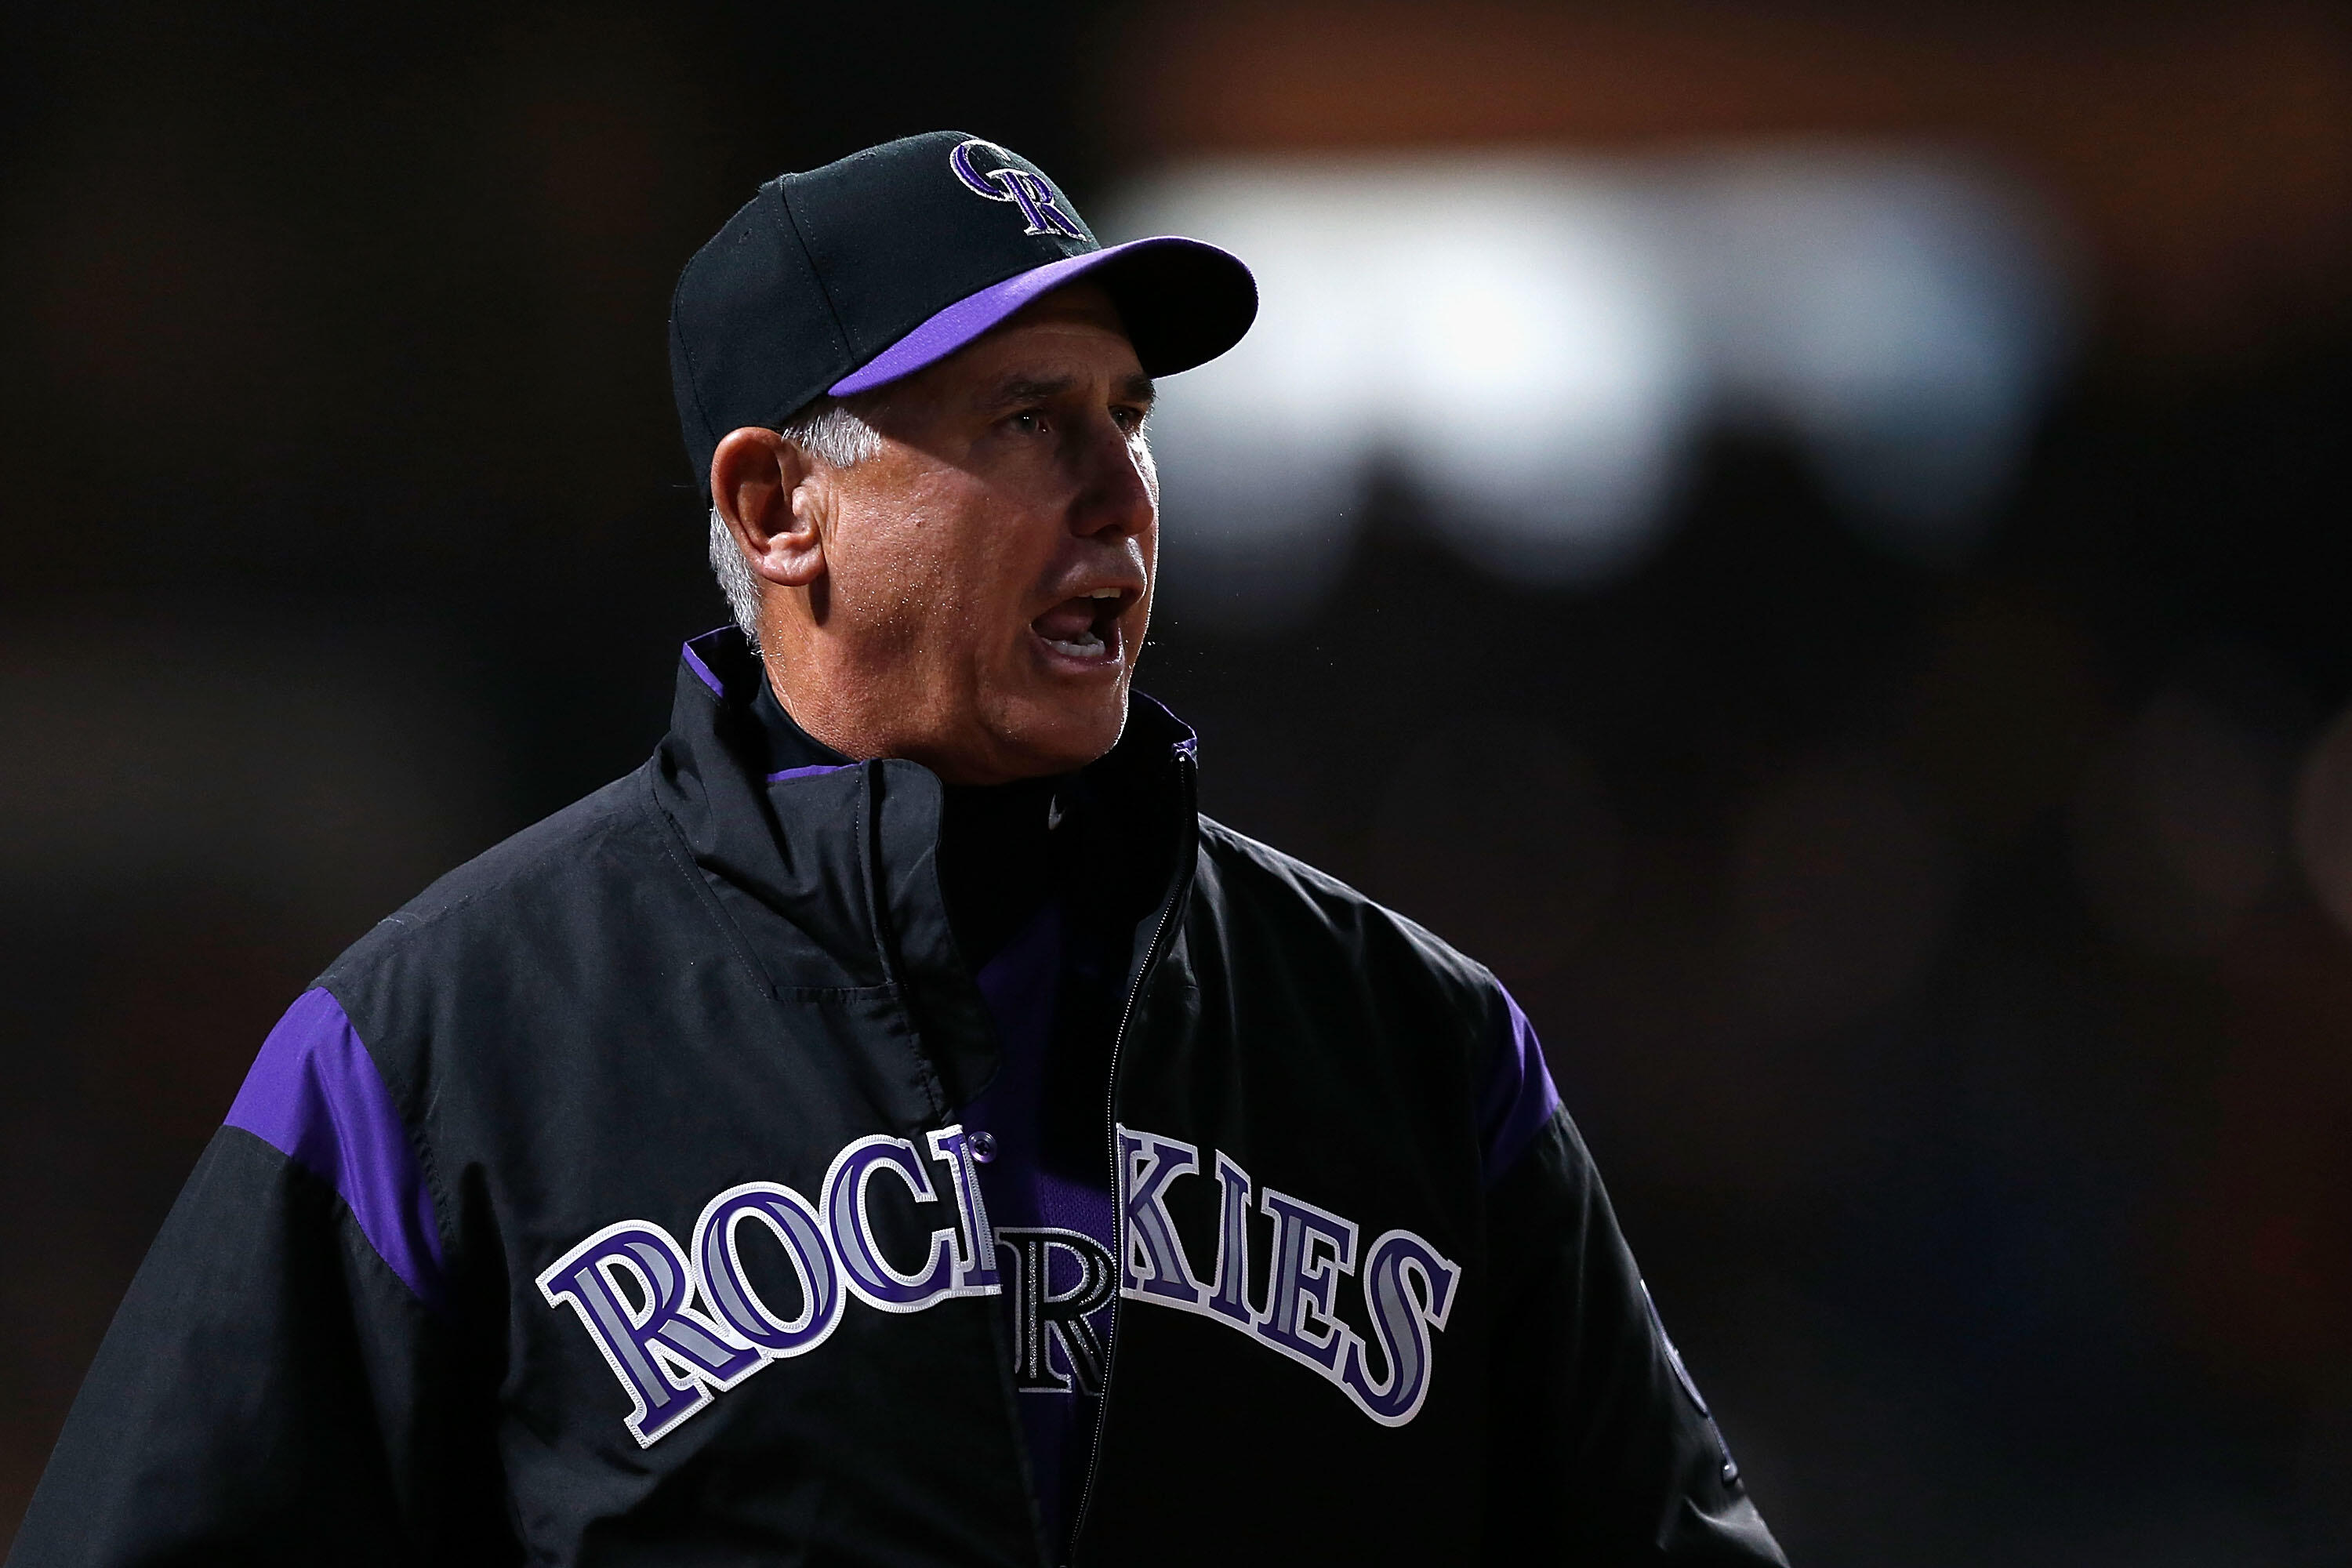 SAN FRANCISCO, CA - APRIL 14: Colorado Rockies manager Bud Black #10 is ejected from the game against the San Francisco Giants in the fourth inning at AT&T Park on April 14, 2017 in San Francisco, California. (Photo by Lachlan Cunningham/Getty Images)